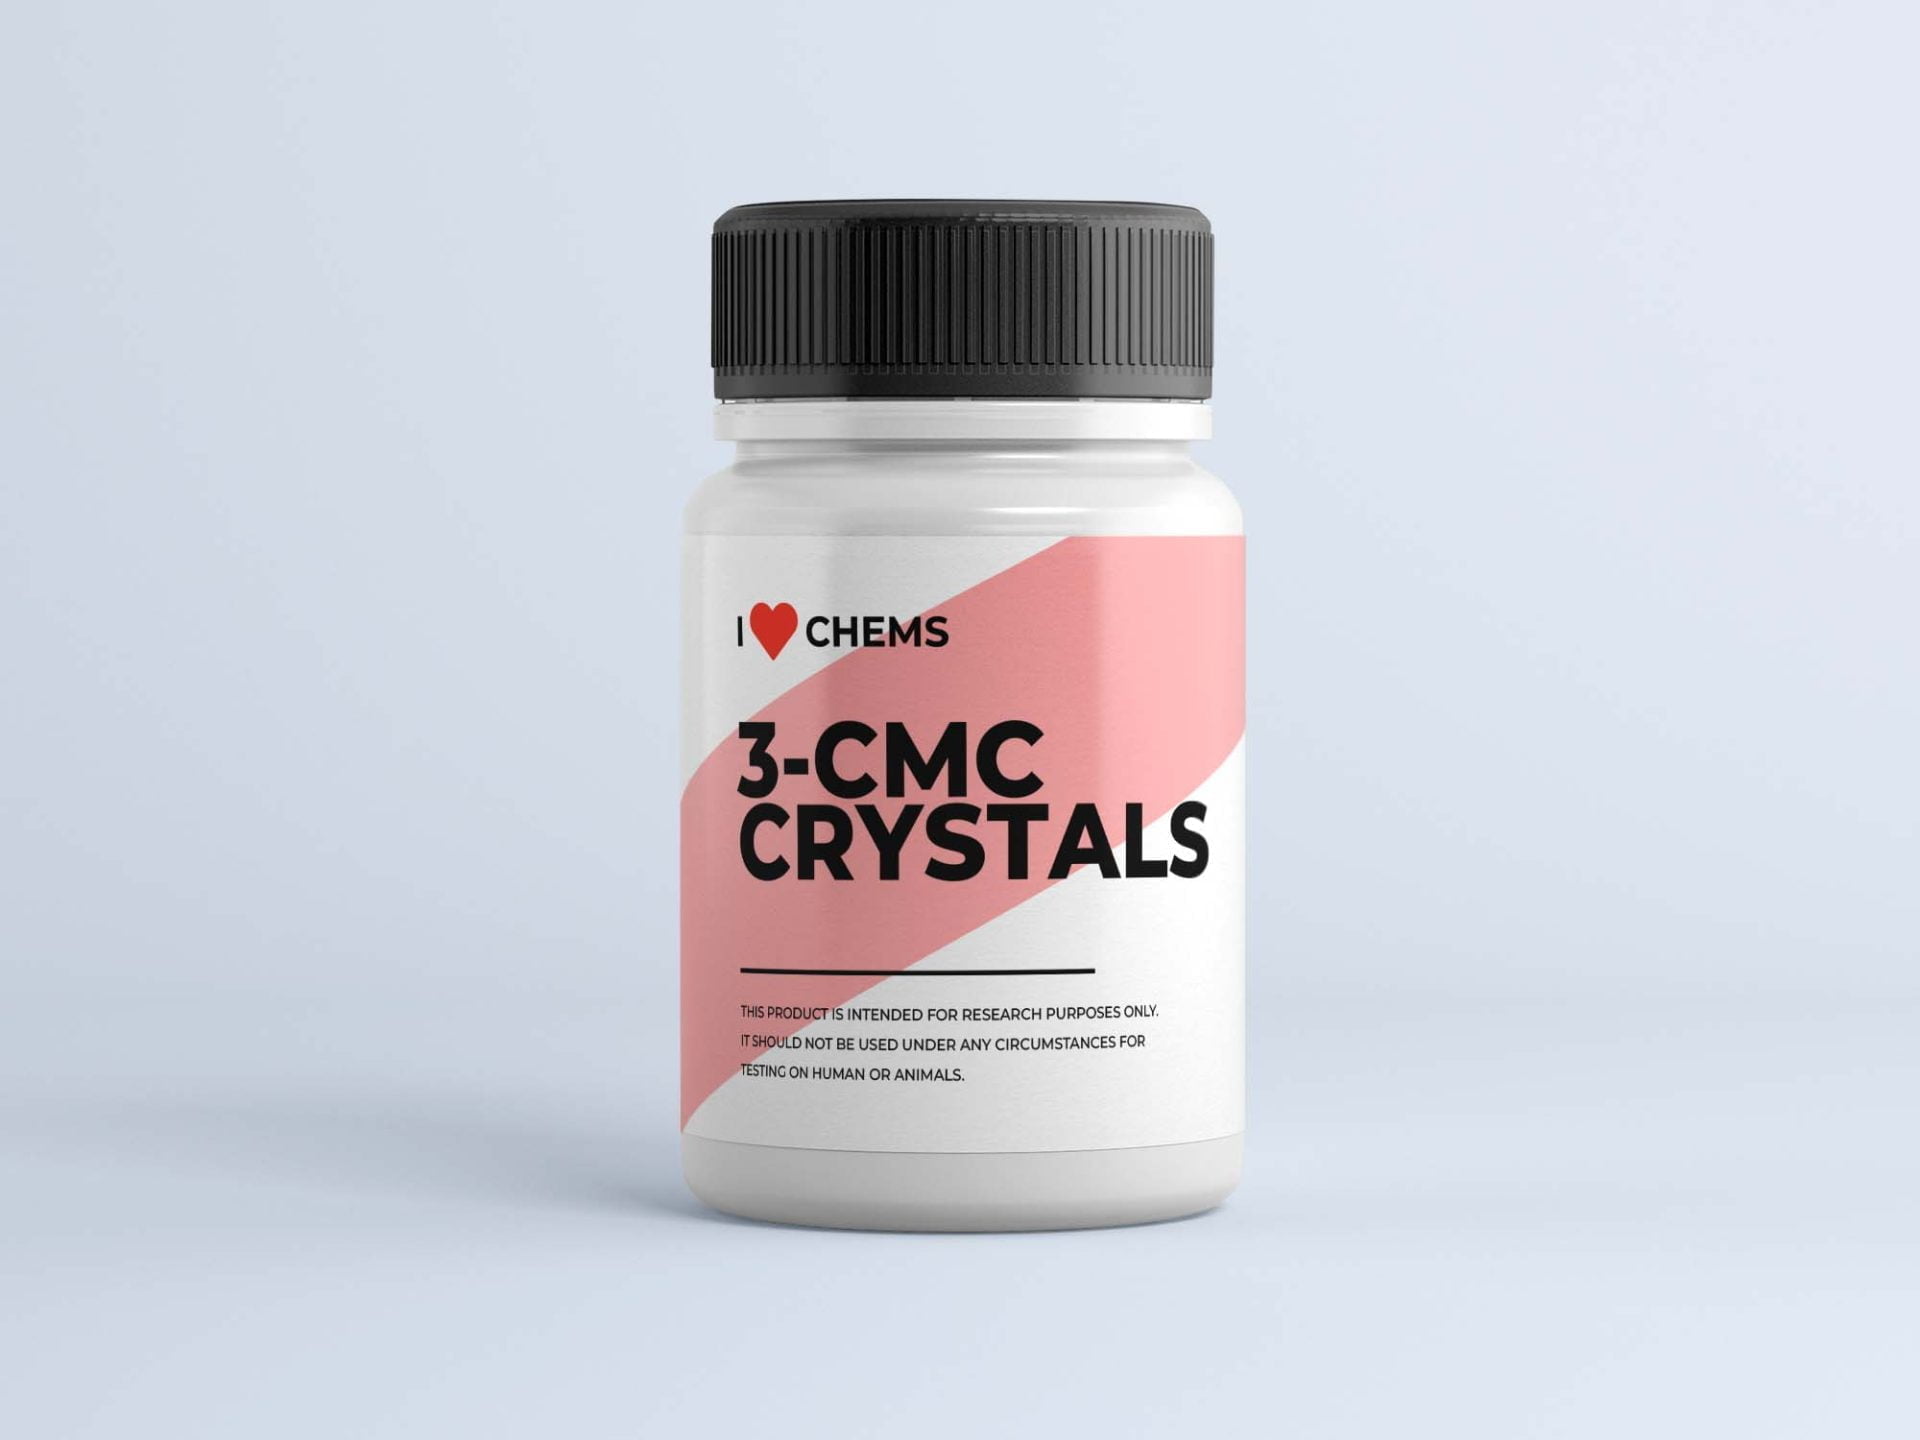 ilovechems rc 3cmc crystals-ilovechems